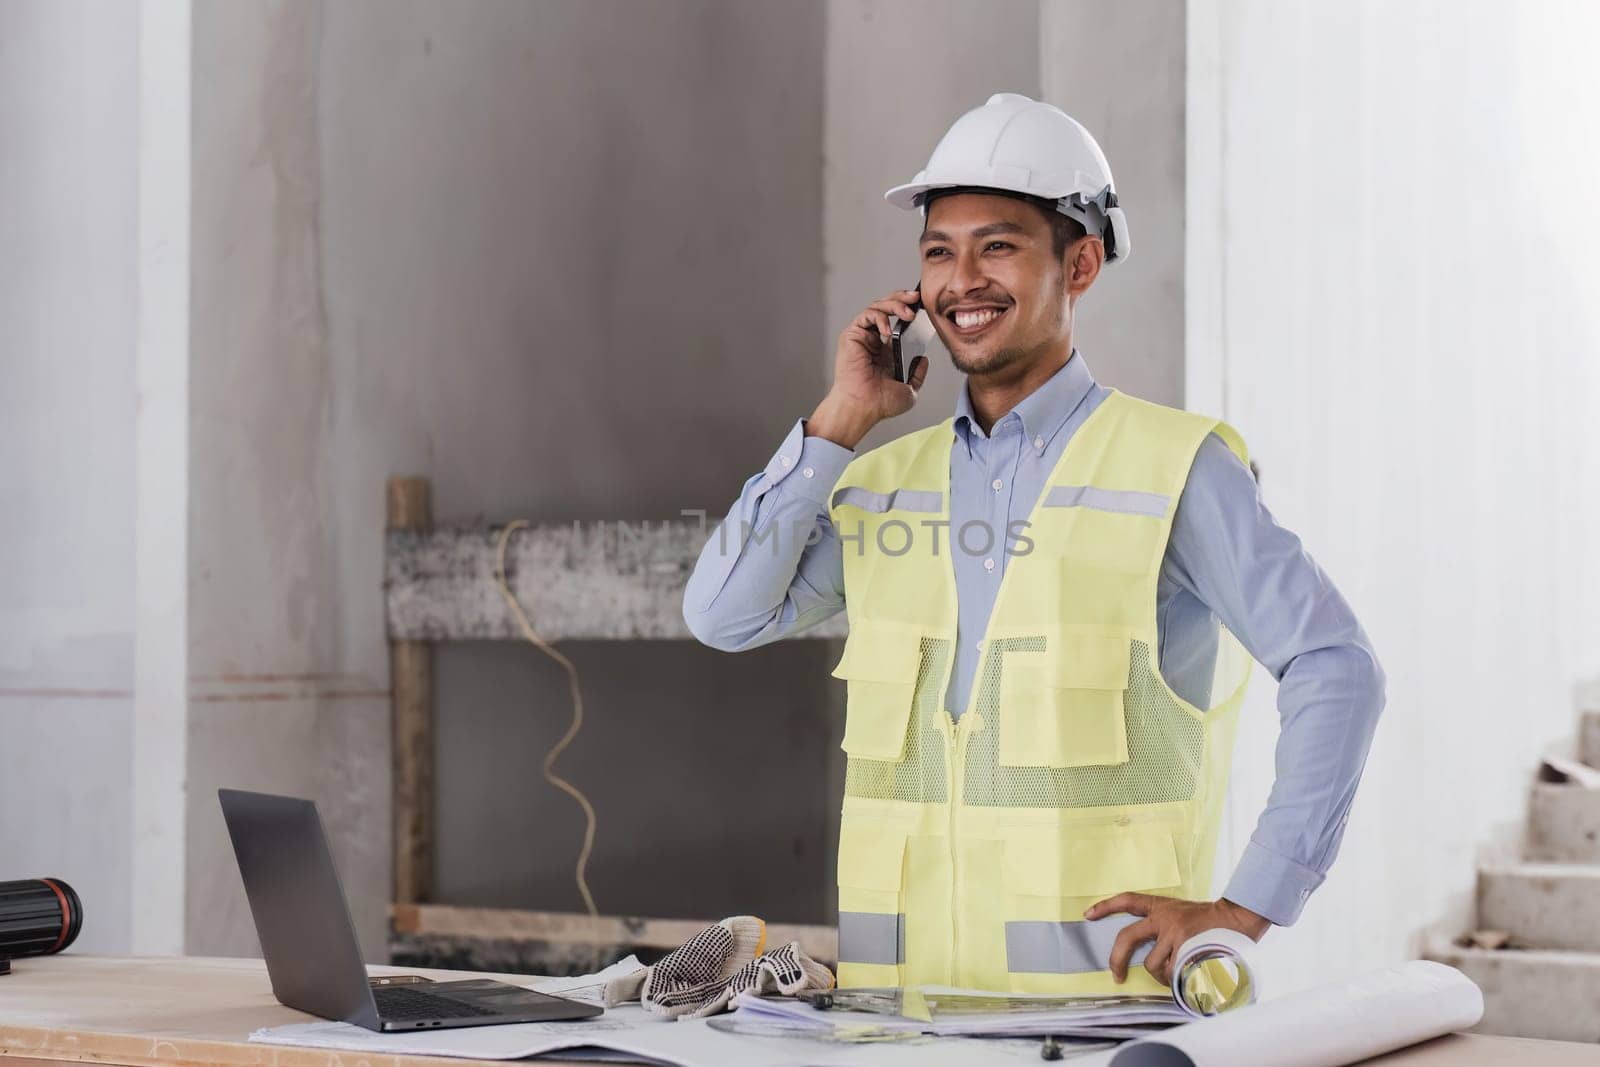 Engineer or Architect with protective safety helmet checking using smartphone holding architectural drawing at construction site. Engineering, Architecture and building project concepts..